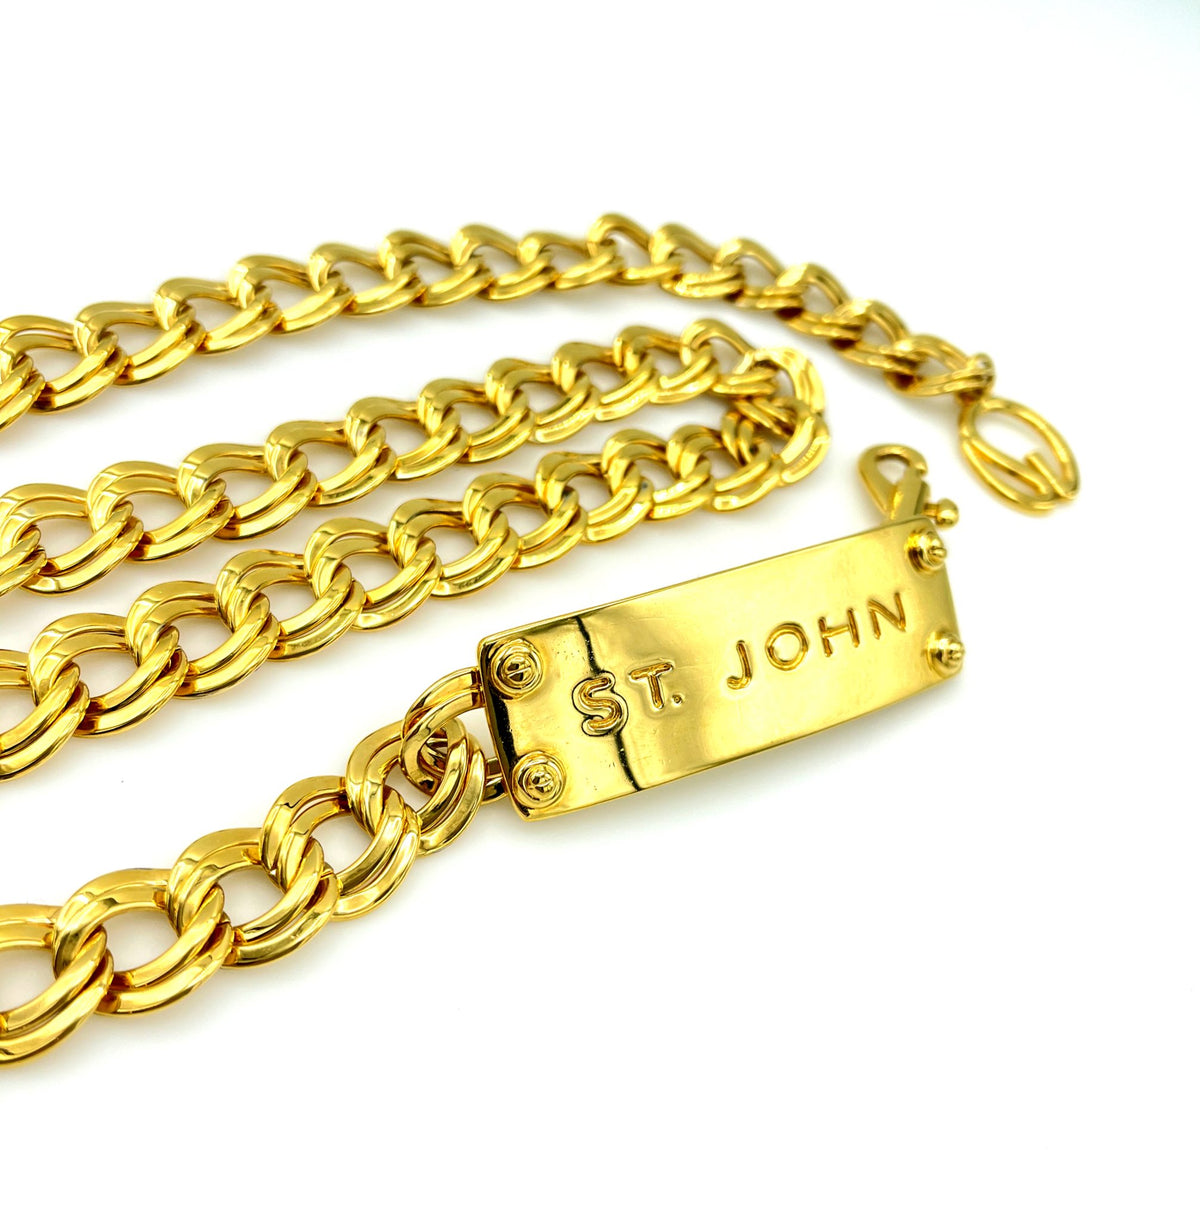 St. John Gold Curb Chain Logo Vintage Belt - 24 Wishes Vintage Jewelry